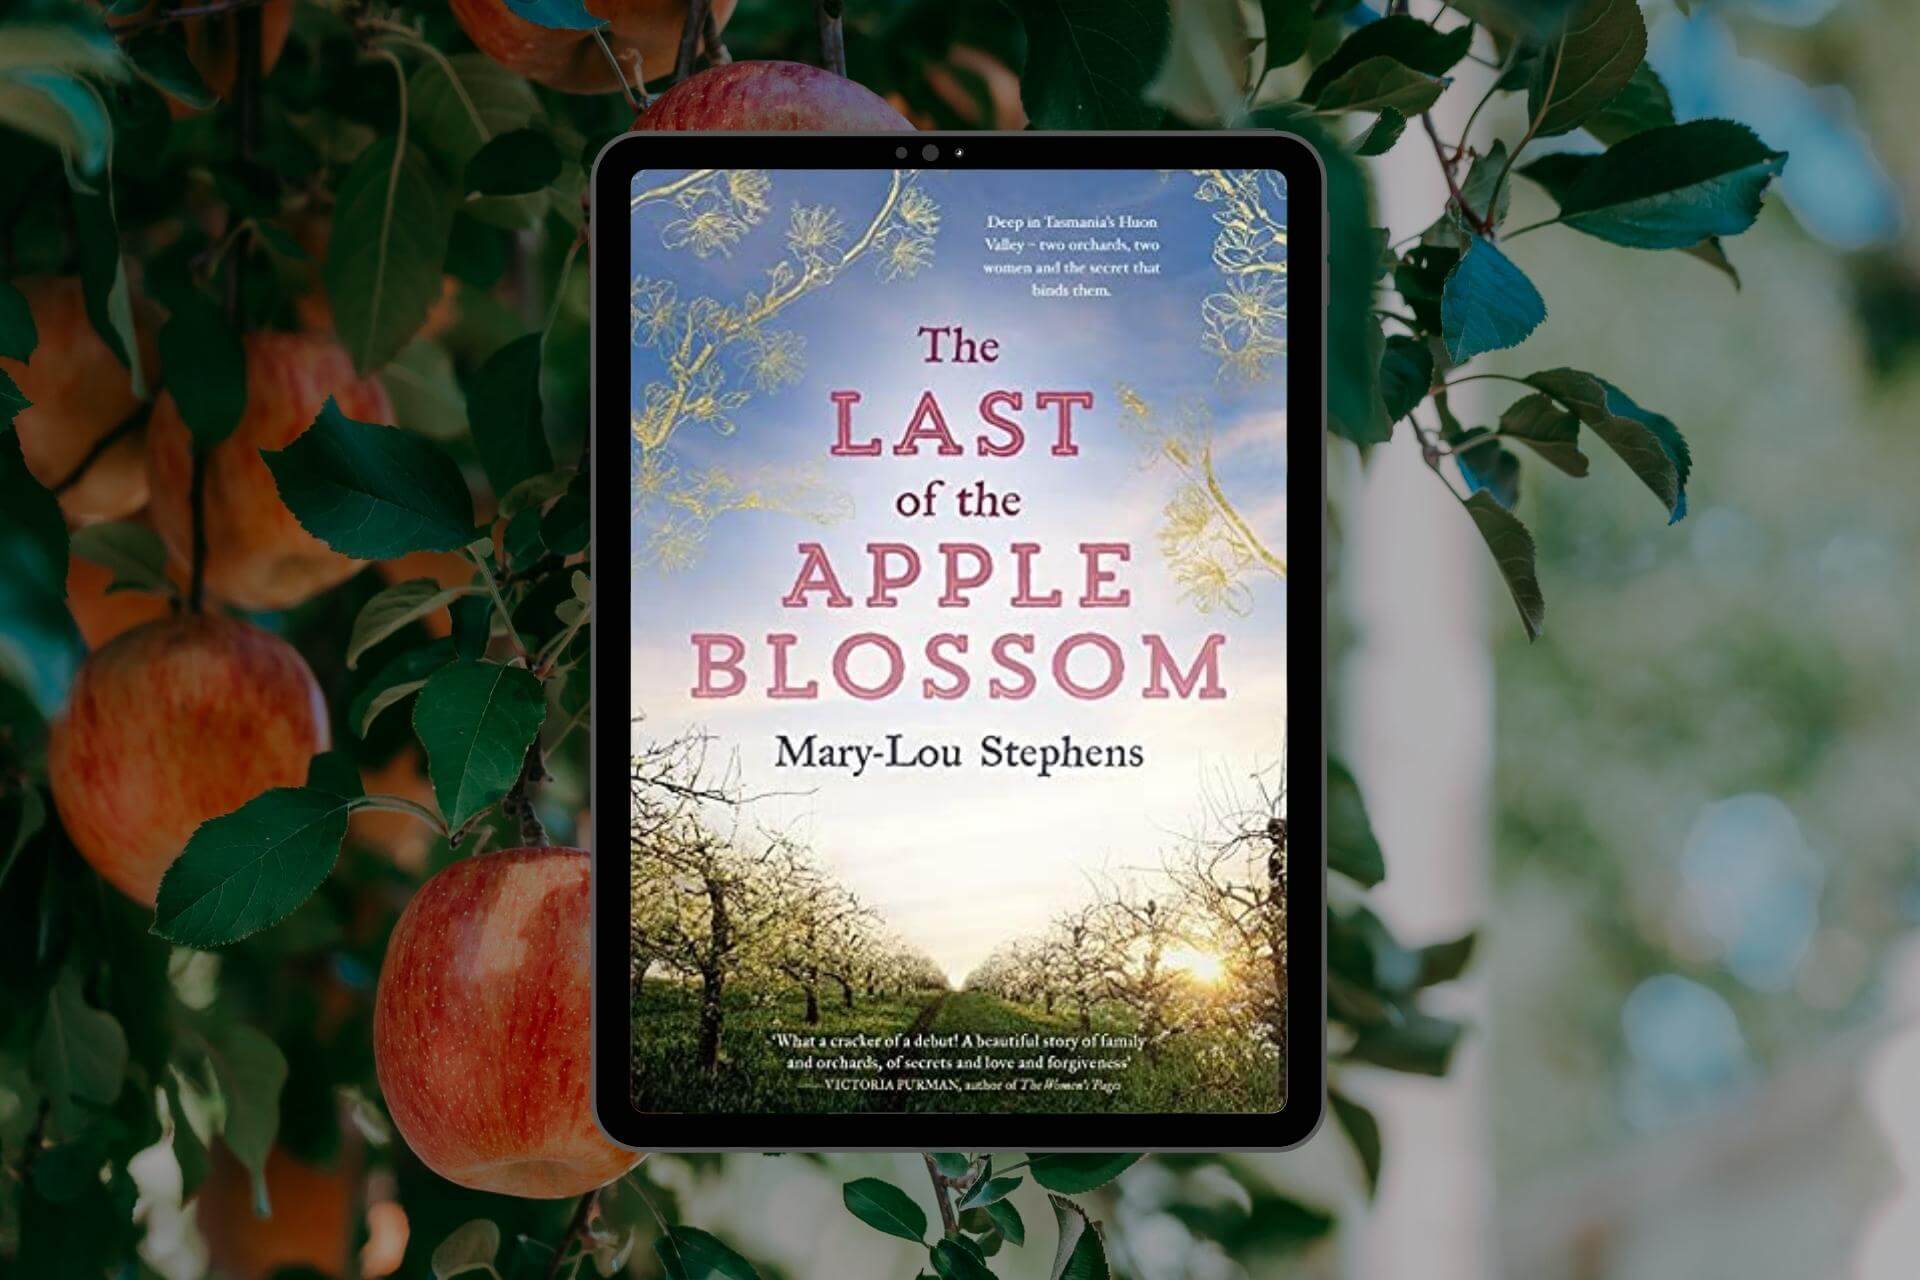 Book Club Questions for The Last of the Apple Blossom by Mary-Lou Stephens